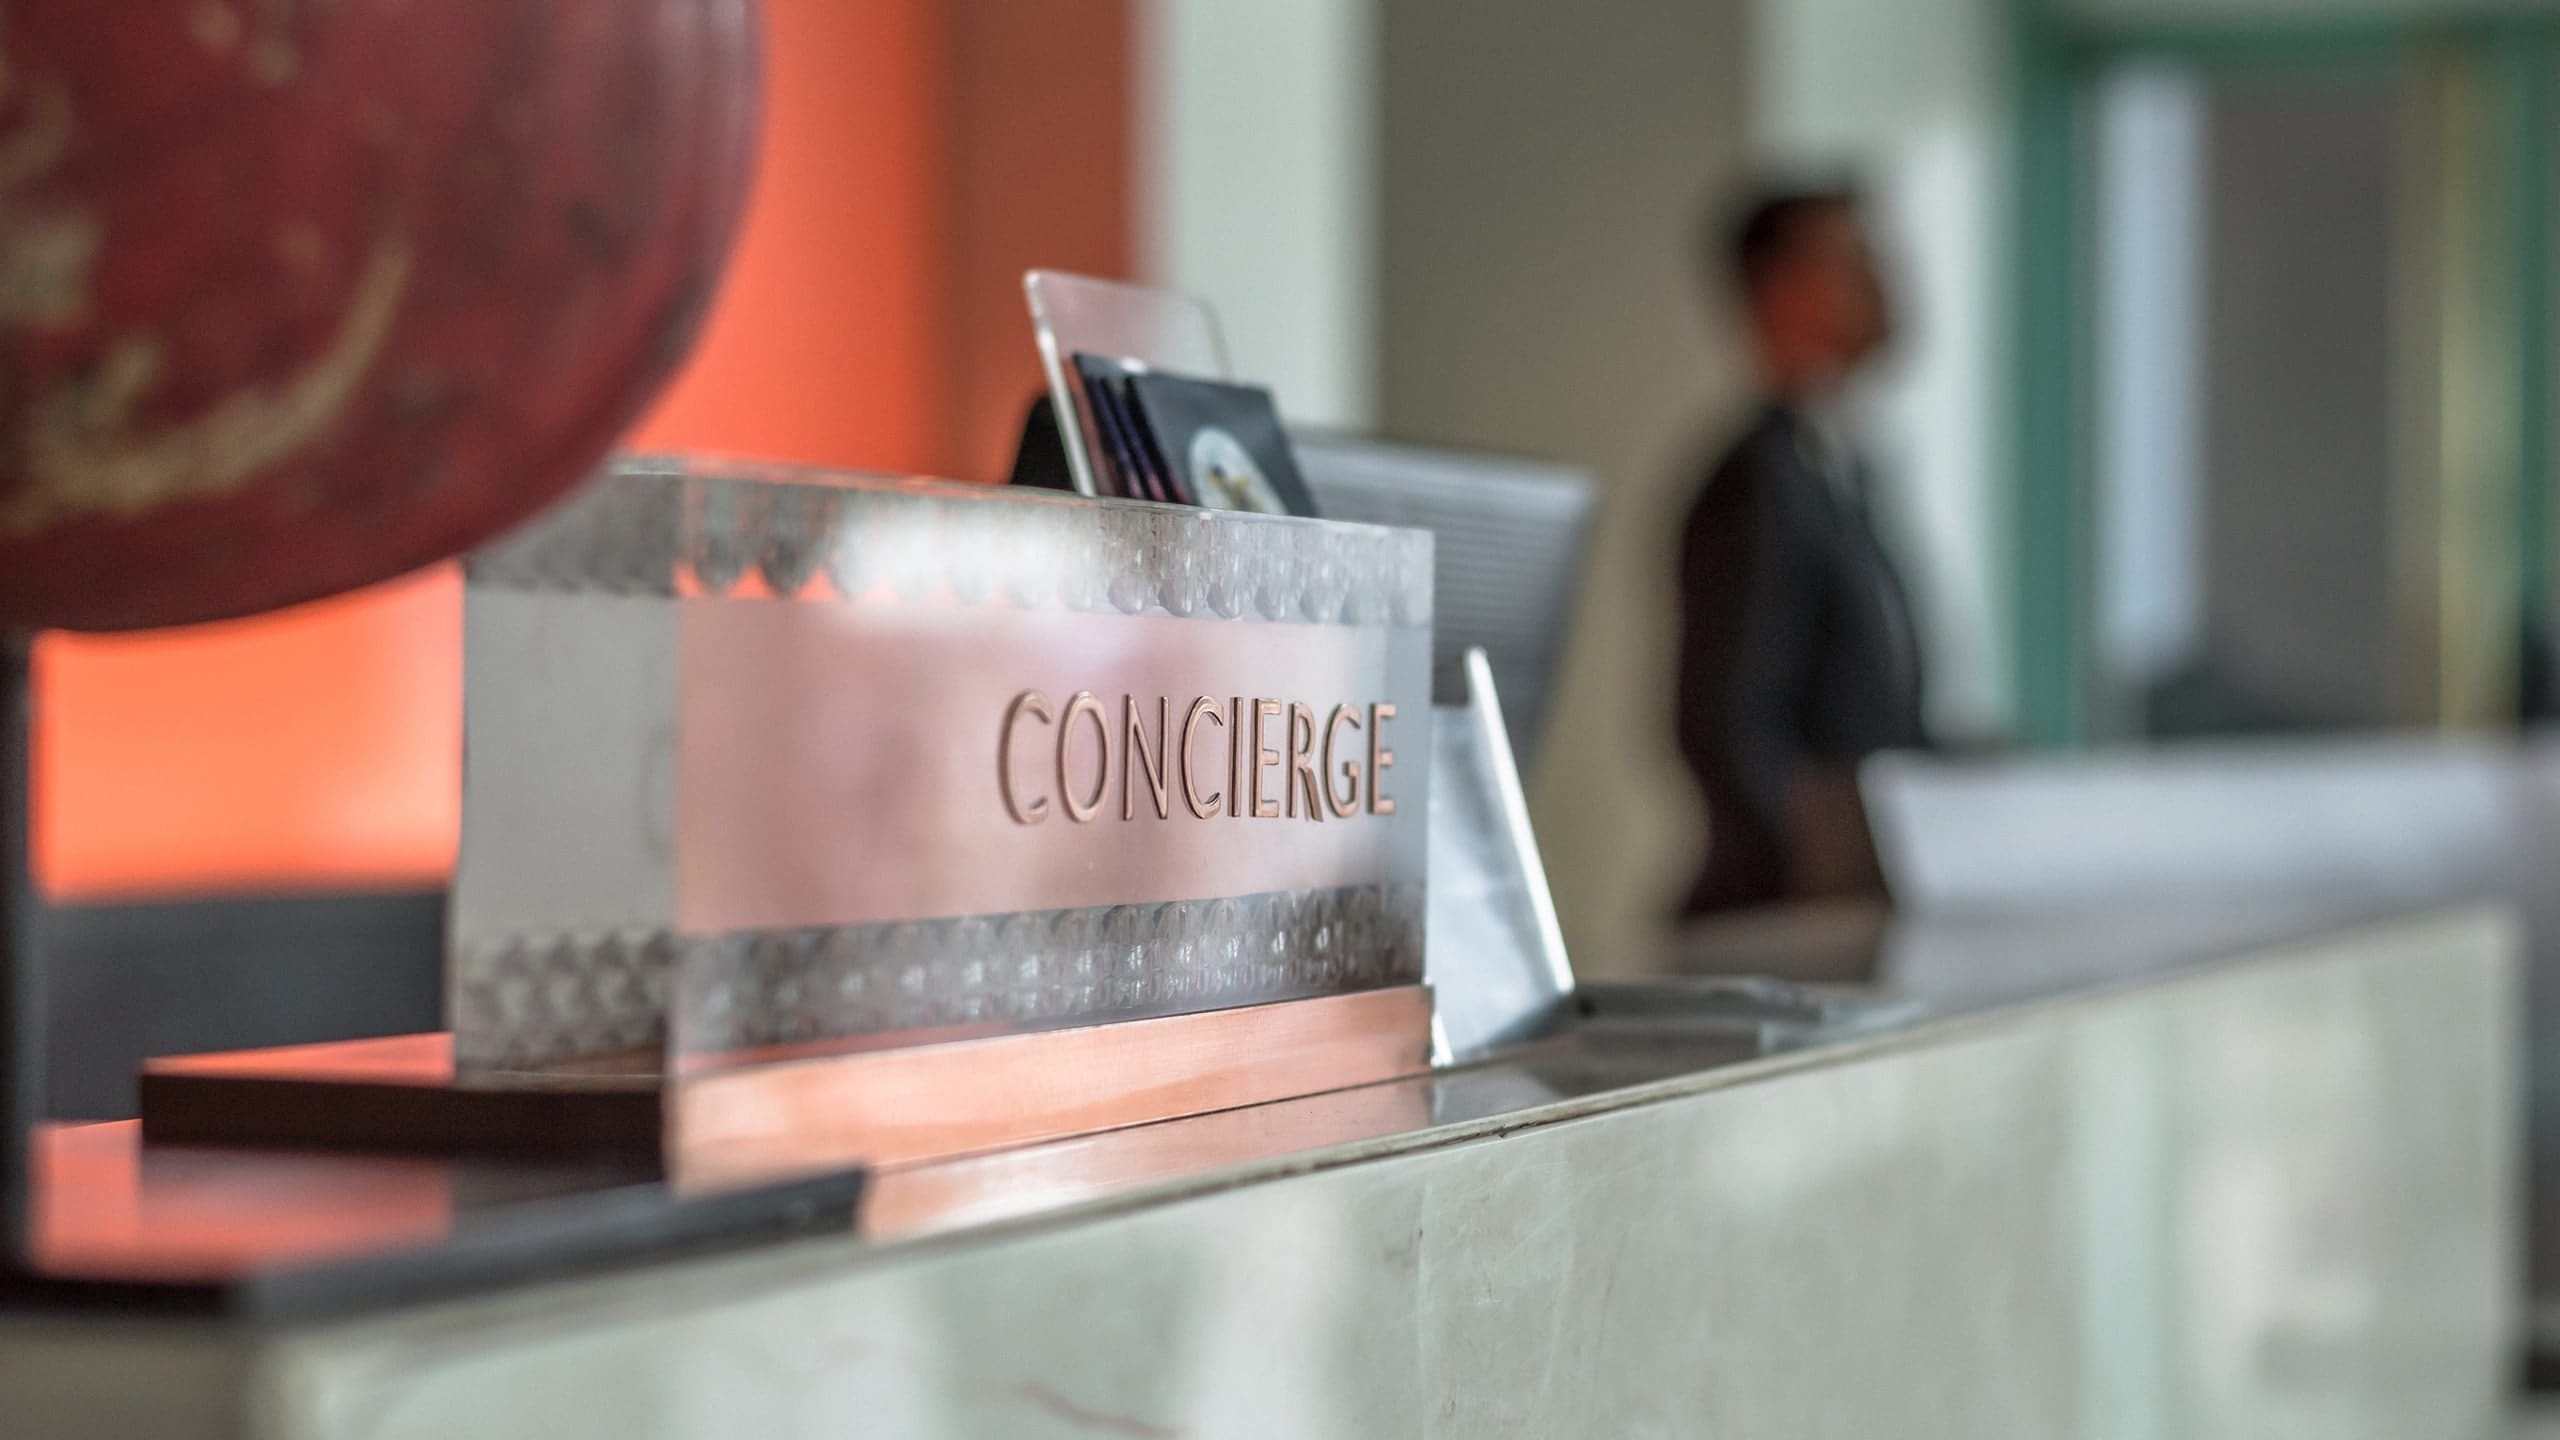 Concierge,Service,Counter,Of,Hotel,,Restaurant,Or,Apartment’s,Front,Desk